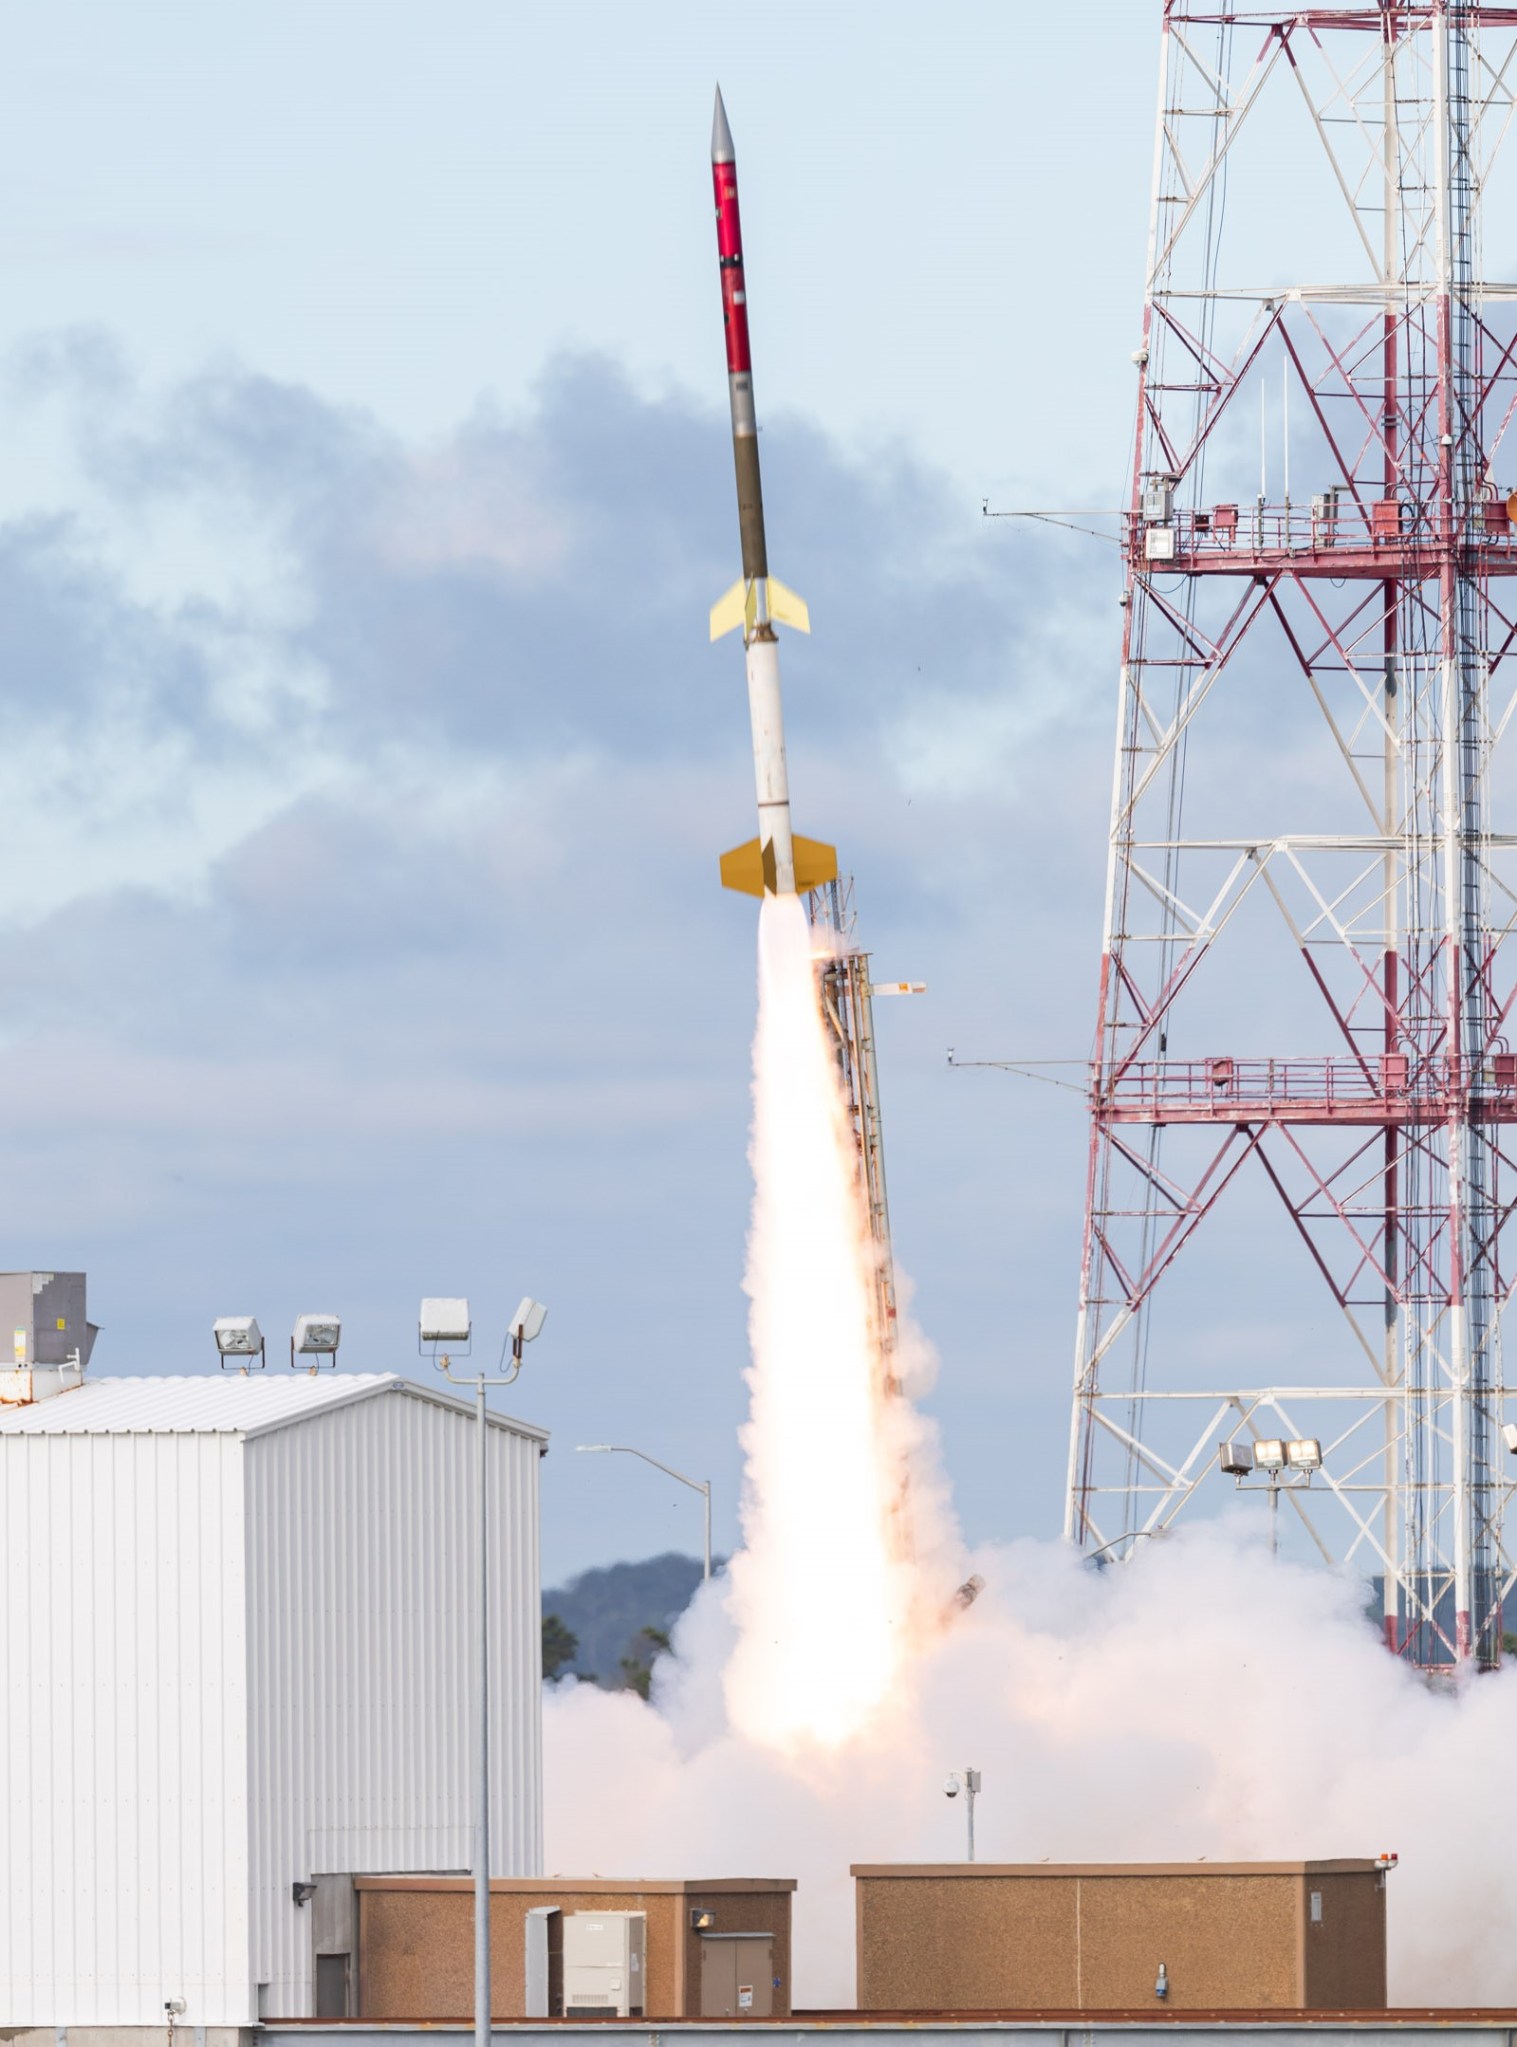 RockOn/RockSat-C experiments are launched in 2021 on a Terrier-Improved Orion sounding rocket from NASA’s Wallops Flight Facility.